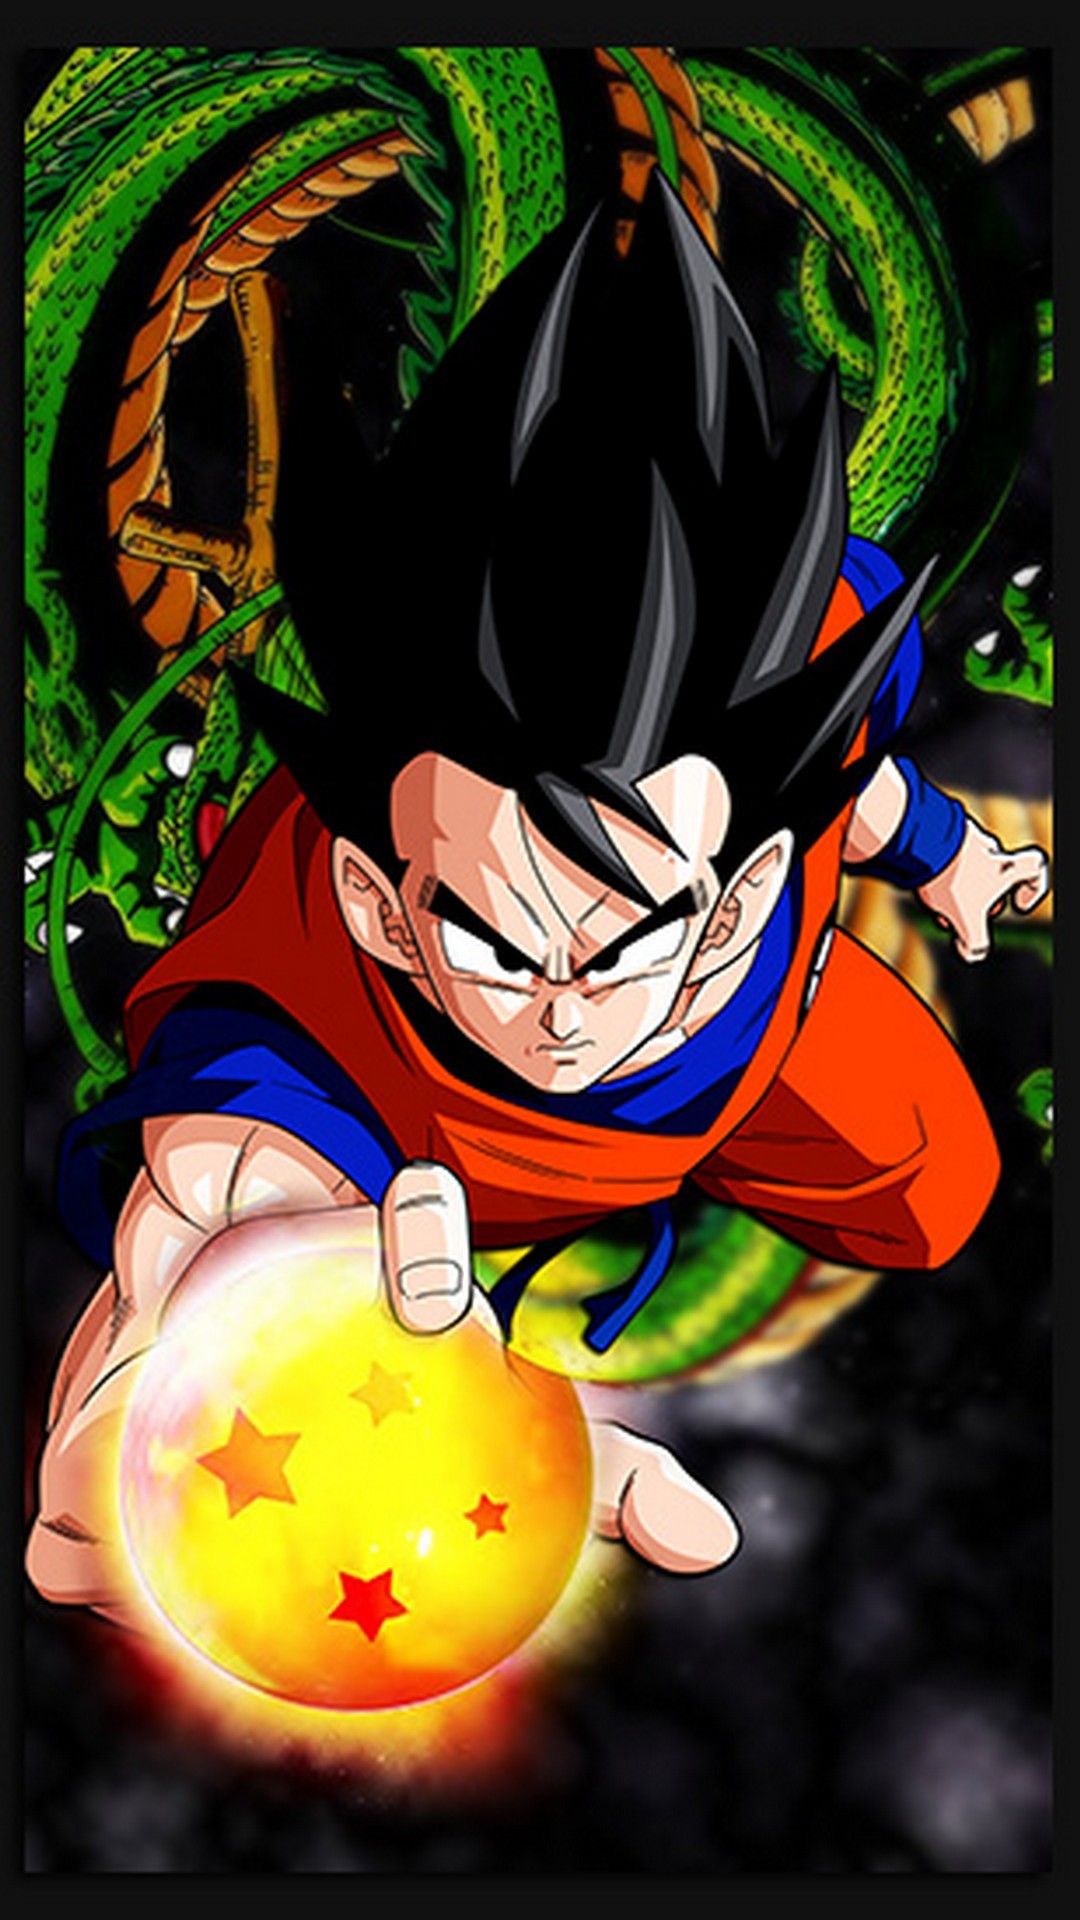 Goku Images HD Wallpapers For Android with HD resolution 1080x1920